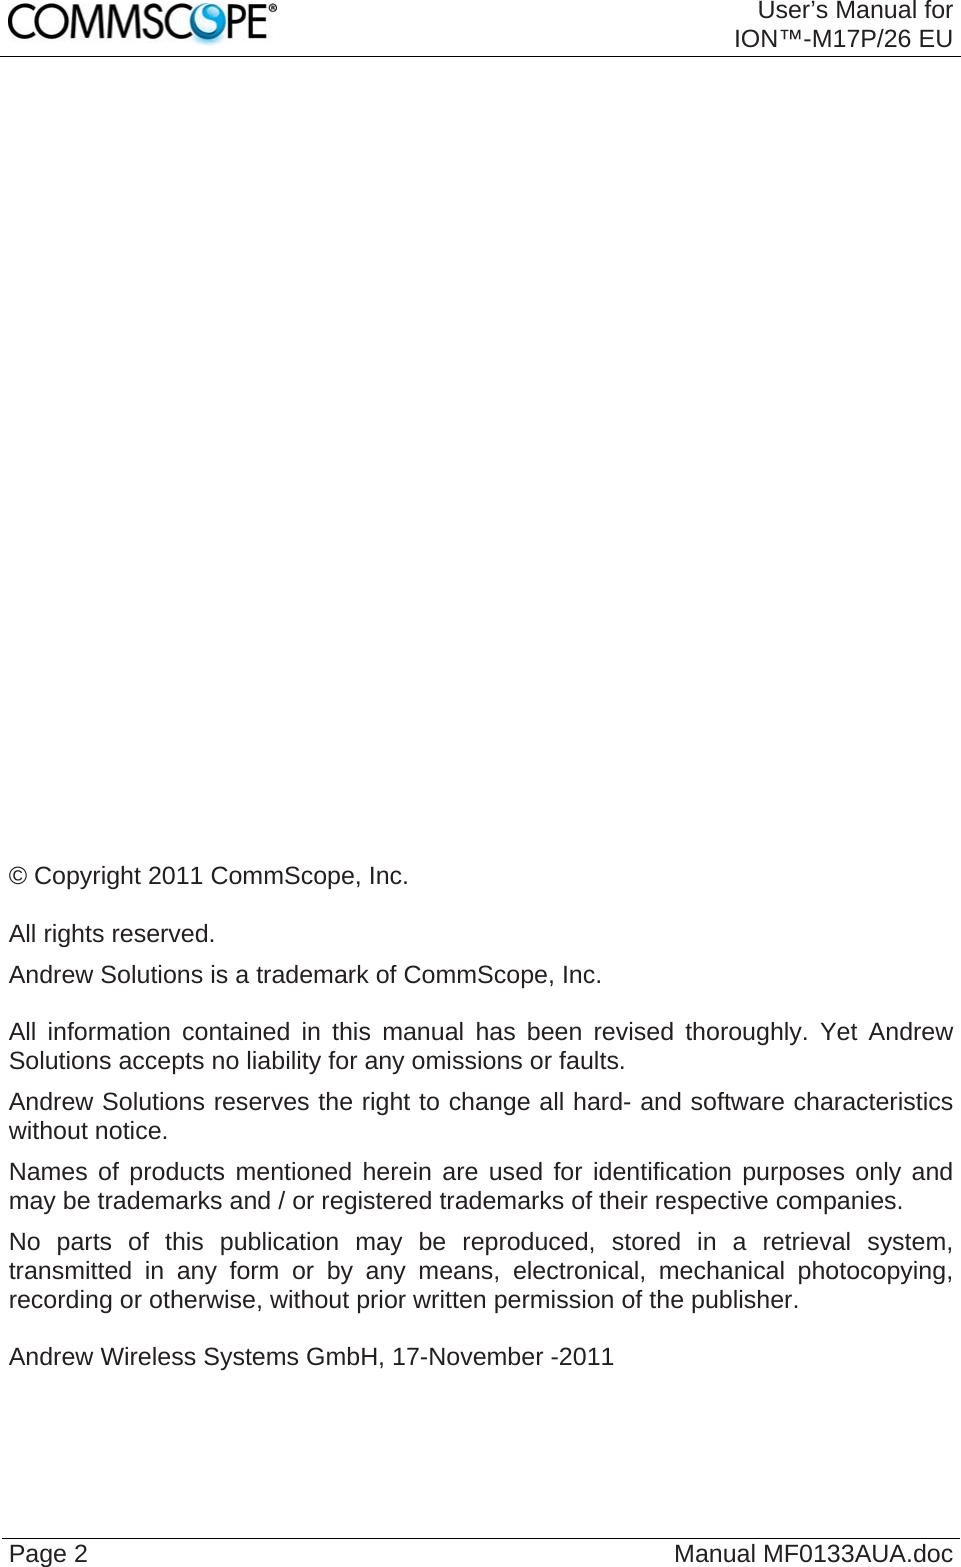  User’s Manual for ION™-M17P/26 EU Page 2  Manual MF0133AUA.doc                            © Copyright 2011 CommScope, Inc.  All rights reserved. Andrew Solutions is a trademark of CommScope, Inc.  All information contained in this manual has been revised thoroughly. Yet Andrew Solutions accepts no liability for any omissions or faults. Andrew Solutions reserves the right to change all hard- and software characteristics without notice. Names of products mentioned herein are used for identification purposes only and may be trademarks and / or registered trademarks of their respective companies. No parts of this publication may be reproduced, stored in a retrieval system, transmitted in any form or by any means, electronical, mechanical photocopying, recording or otherwise, without prior written permission of the publisher.  Andrew Wireless Systems GmbH, 17-November -2011  